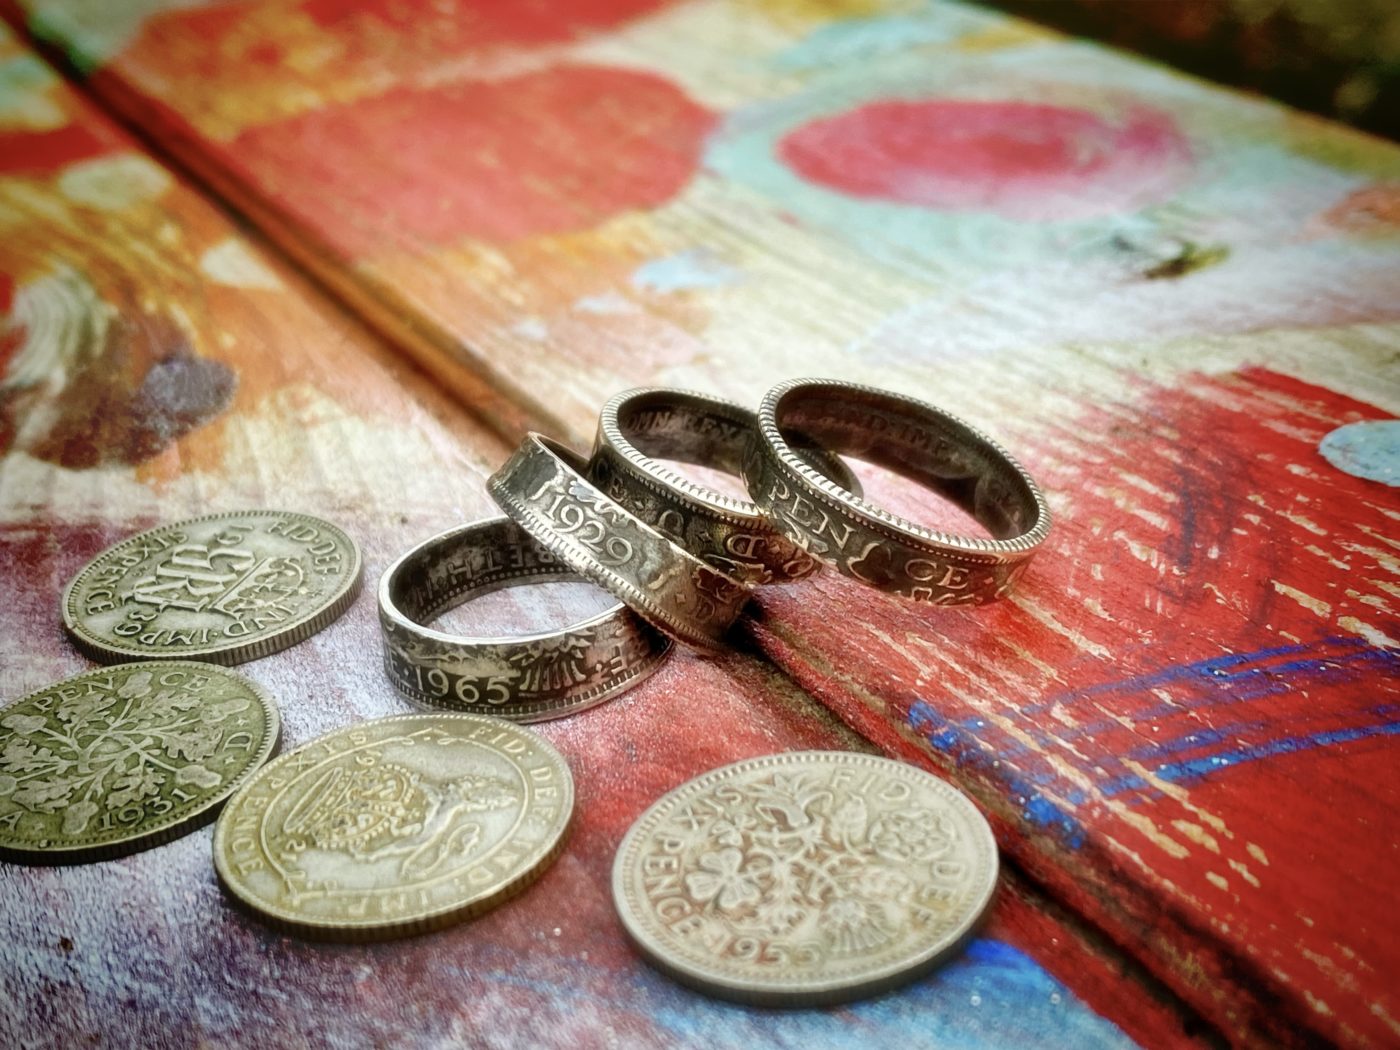 lucky sixpence coin ring